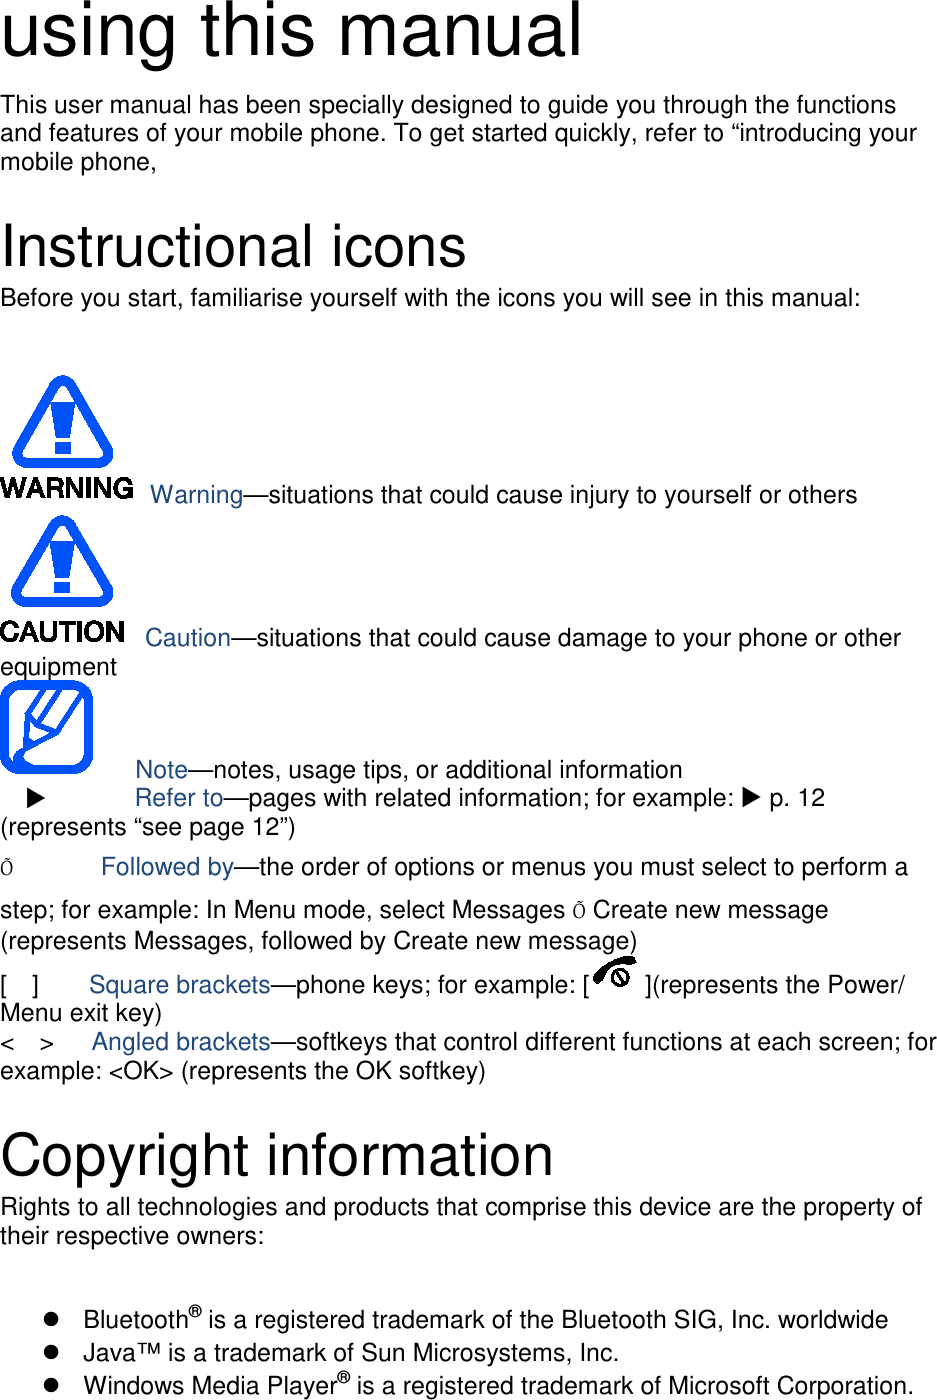 using this manual This user manual has been specially designed to guide you through the functions and features of your mobile phone. To get started quickly, refer to “introducing your mobile phone,  Instructional icons Before you start, familiarise yourself with the icons you will see in this manual:     Warning—situations that could cause injury to yourself or others  Caution—situations that could cause damage to your phone or other equipment    Note—notes, usage tips, or additional information          Refer to—pages with related information; for example:  p. 12 (represents “see page 12”) Õ       Followed by—the order of options or menus you must select to perform a step; for example: In Menu mode, select Messages Õ Create new message (represents Messages, followed by Create new message) [  ]    Square brackets—phone keys; for example: [ ](represents the Power/ Menu exit key) &lt;  &gt;   Angled brackets—softkeys that control different functions at each screen; for example: &lt;OK&gt; (represents the OK softkey)  Copyright information Rights to all technologies and products that comprise this device are the property of their respective owners:   Bluetooth® Java™ is a trademark of Sun Microsystems, Inc.  is a registered trademark of the Bluetooth SIG, Inc. worldwide  Windows Media Player® is a registered trademark of Microsoft Corporation. 